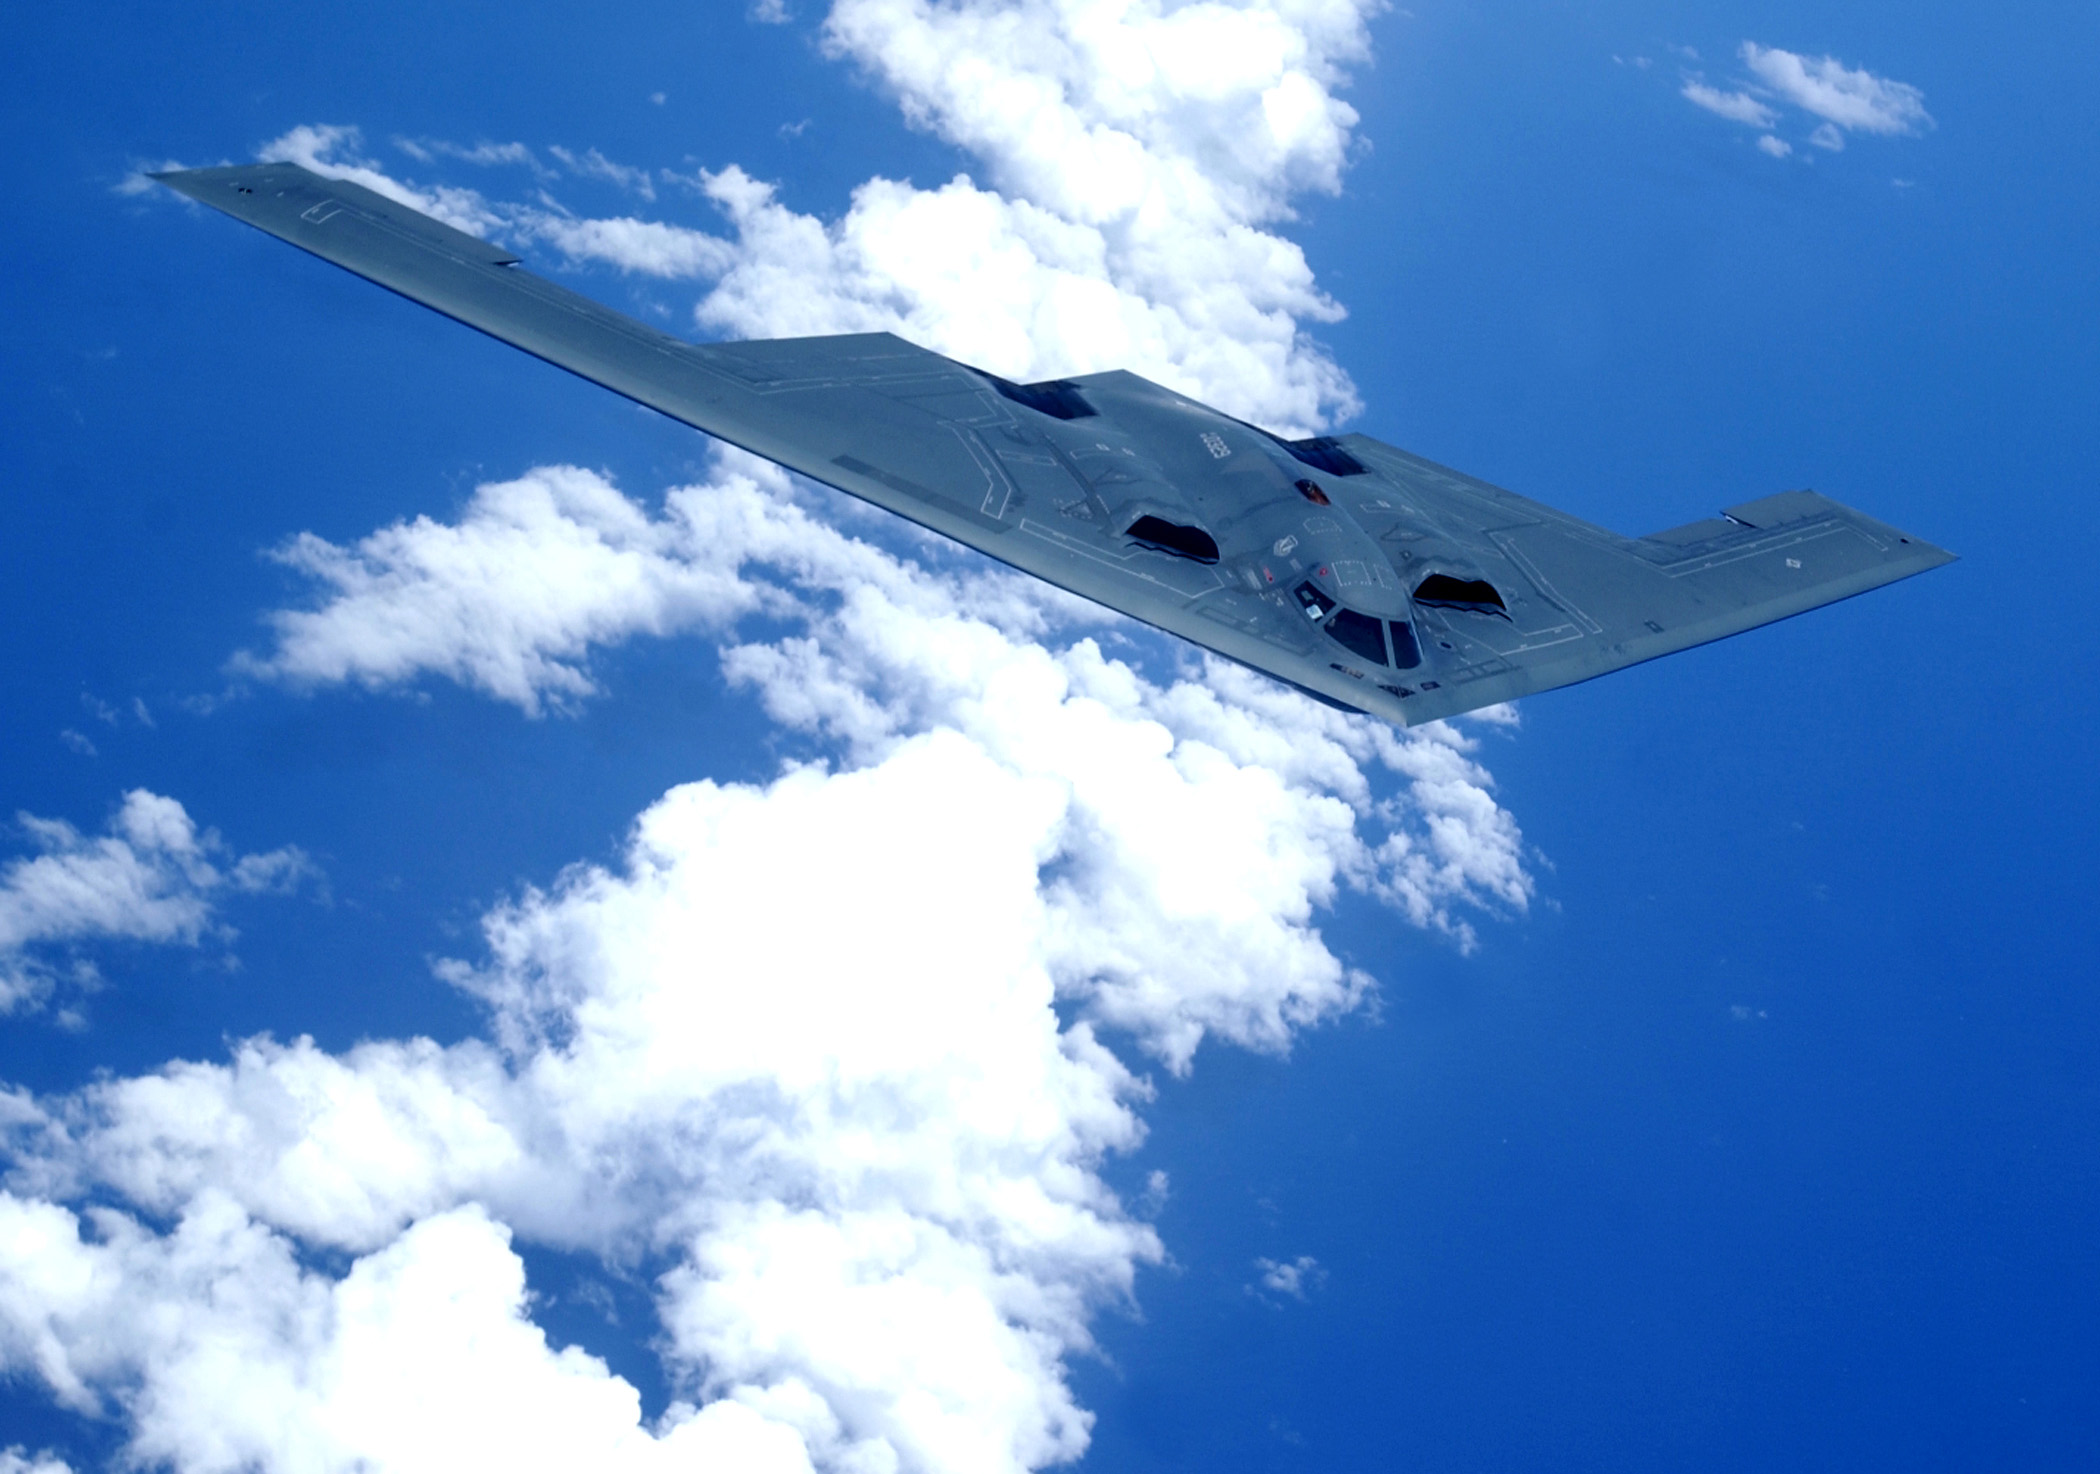 OVER THE PACIFIC OCEAN -- A B-2 Spirit soars through the sky after a refueling mission here May 2. The B-2 is assigned to the 393rd Expeditionary Bomb Squadron at Whiteman Air Force Base, Mo. The bomber is currently deployed to Andersen Air Force Base, Guam, to assist in maintaining a continuous bomber presence in the Asia-Pacific region. (U.S. AIr Force photo by Tech. Sgt. Cecilio Ricardo)